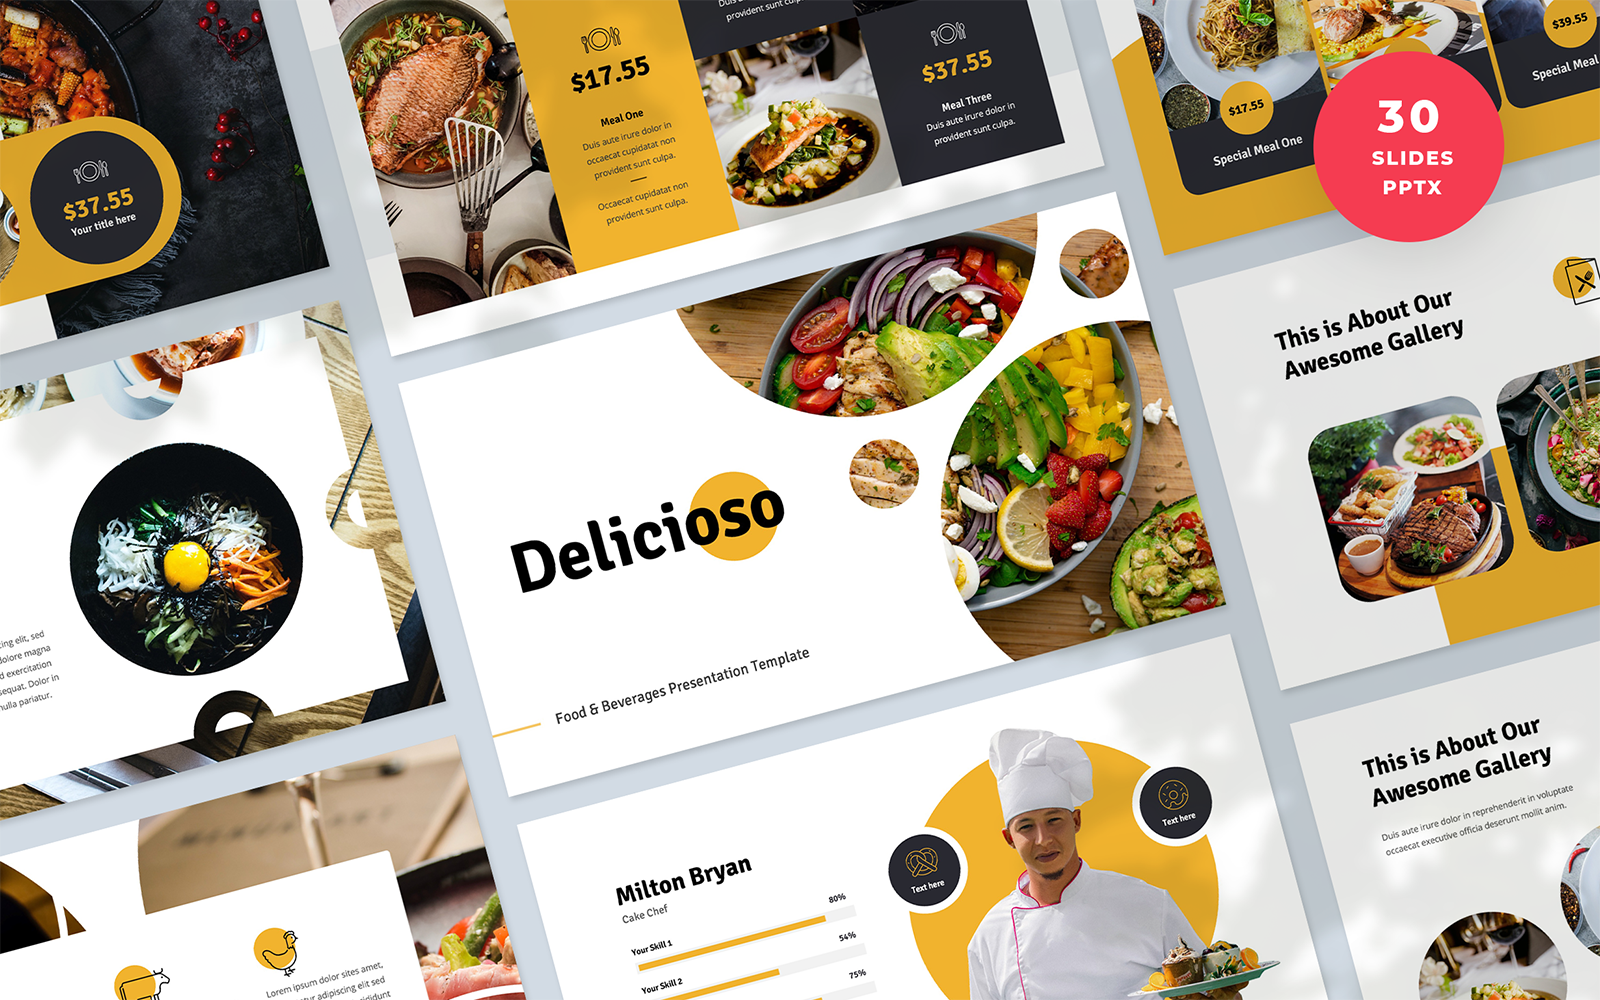 Delicioso - Food and Beverages Presentation PowerPoint Template